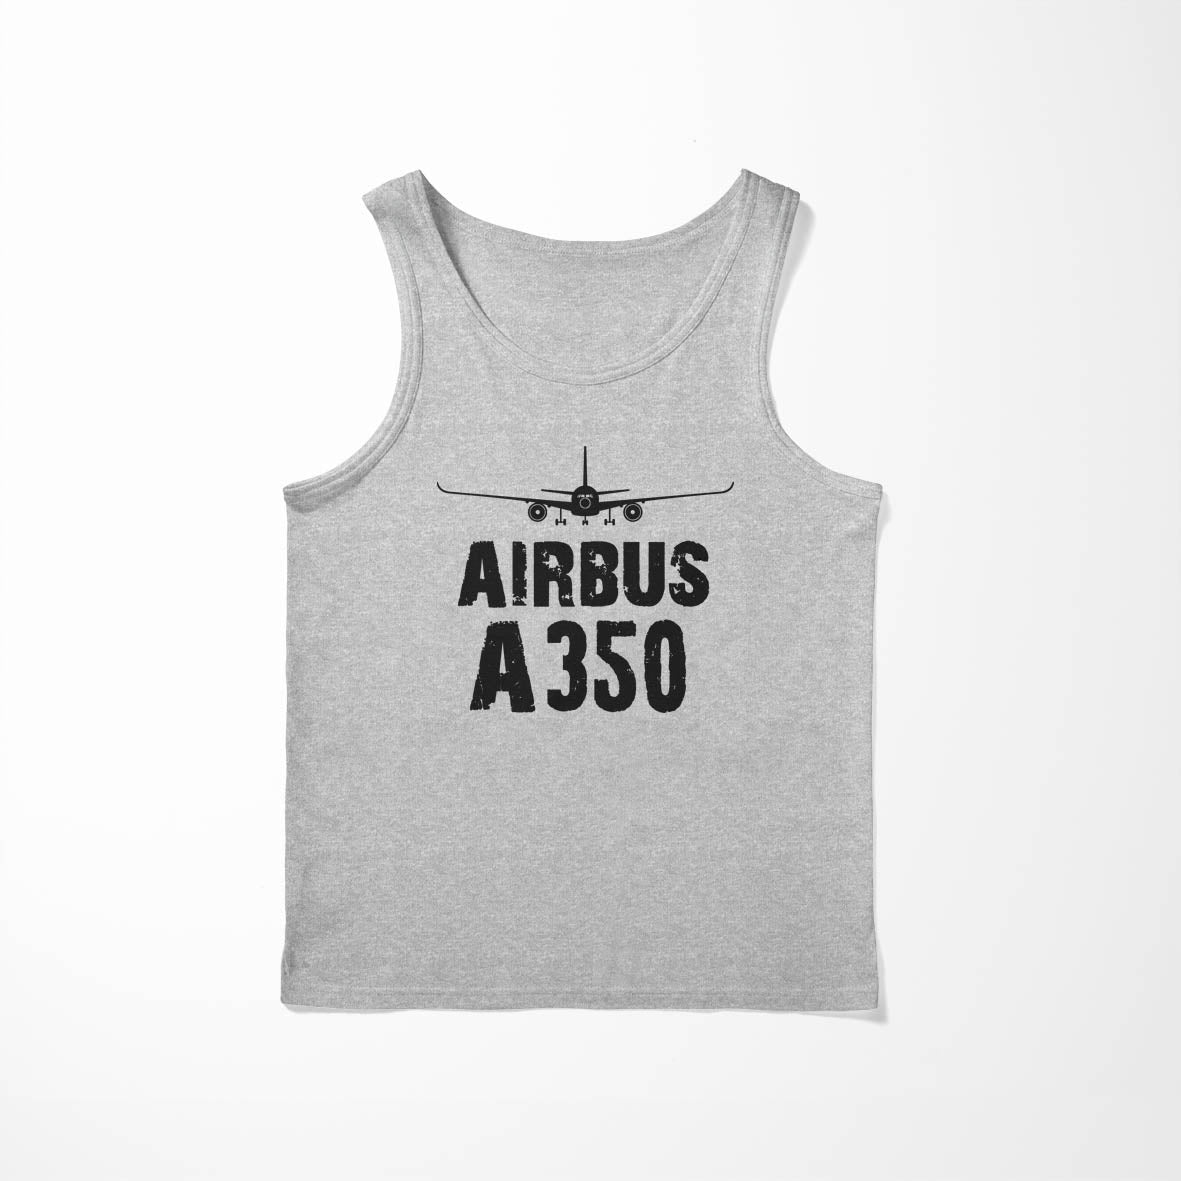 Airbus A350 & Plane Designed Tank Tops